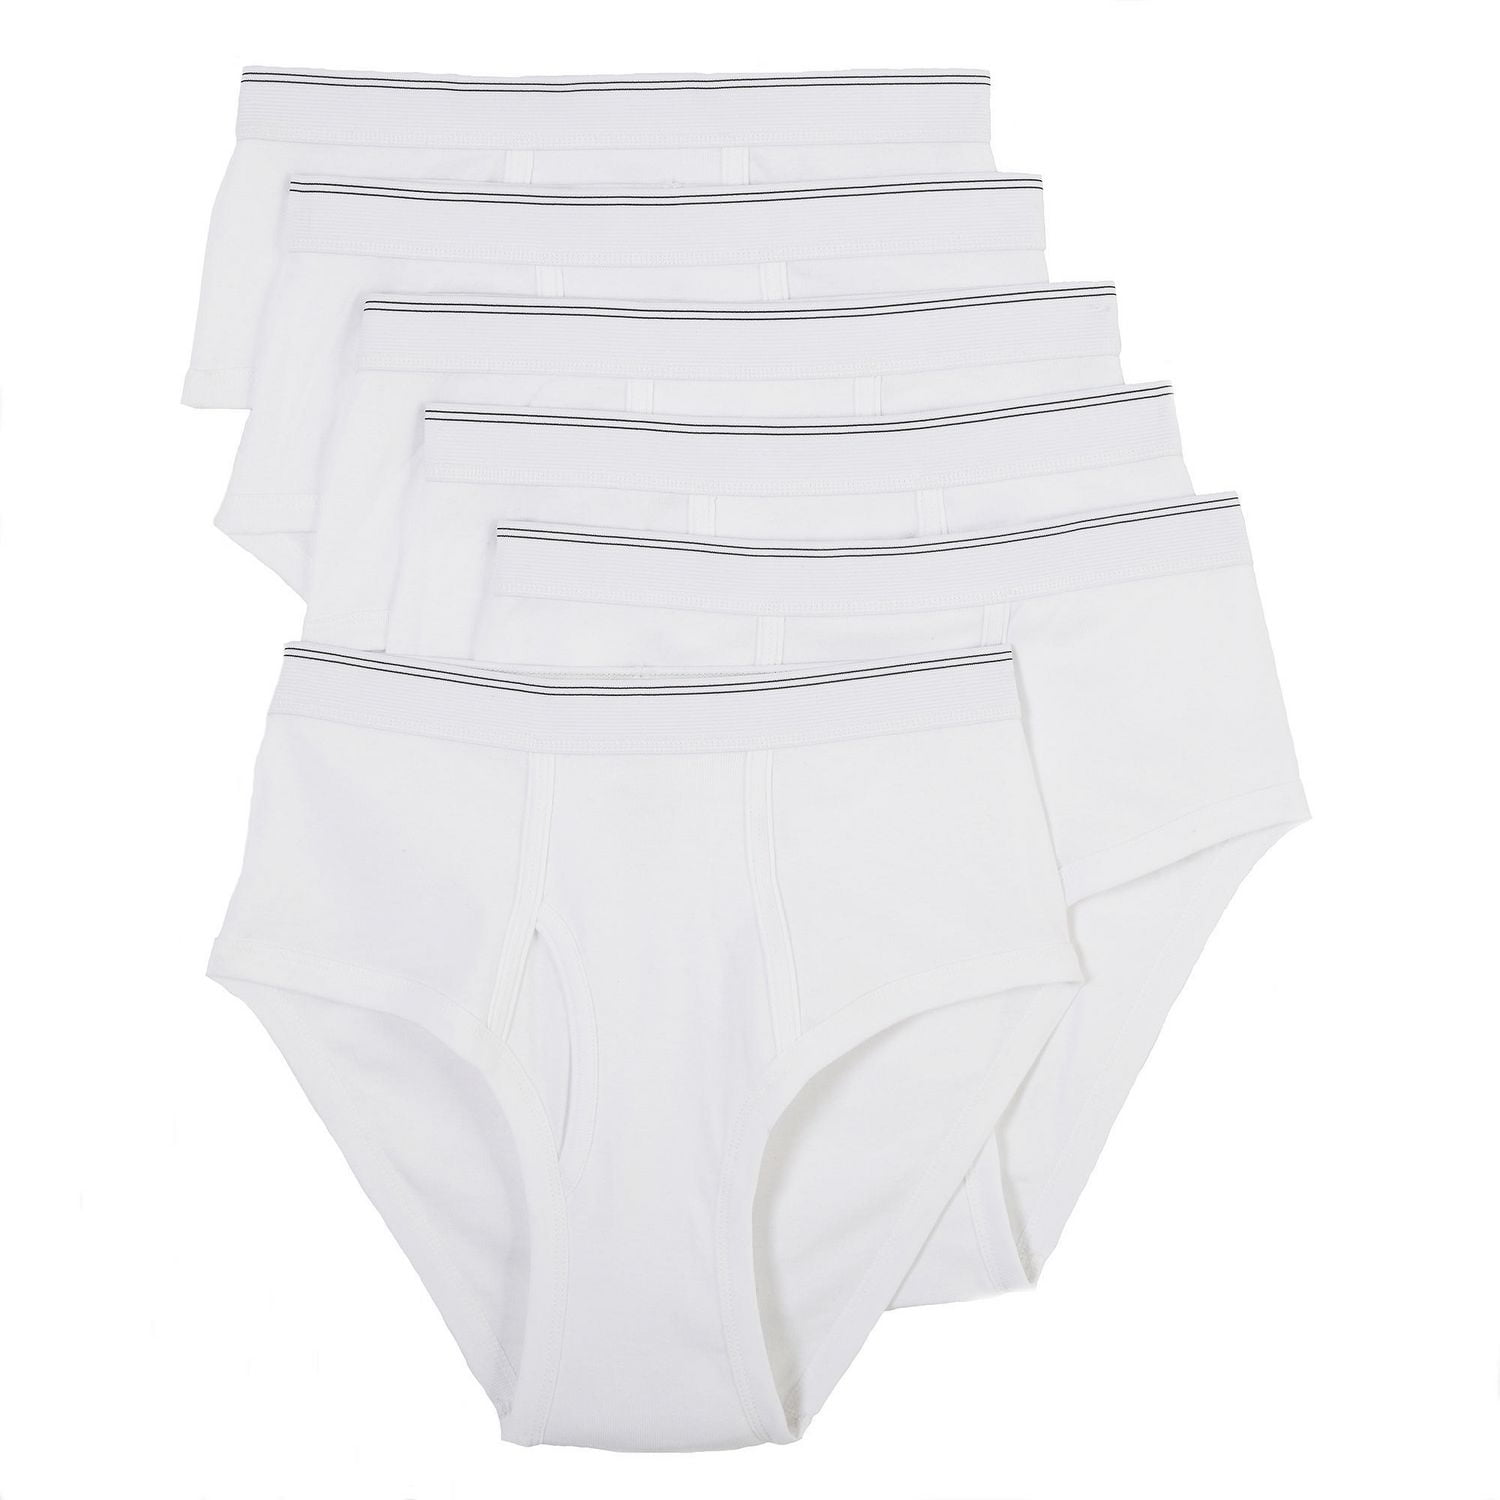 GWAABD Mens Big and Tall Underwear Men's Panties Draw Frame Cotton